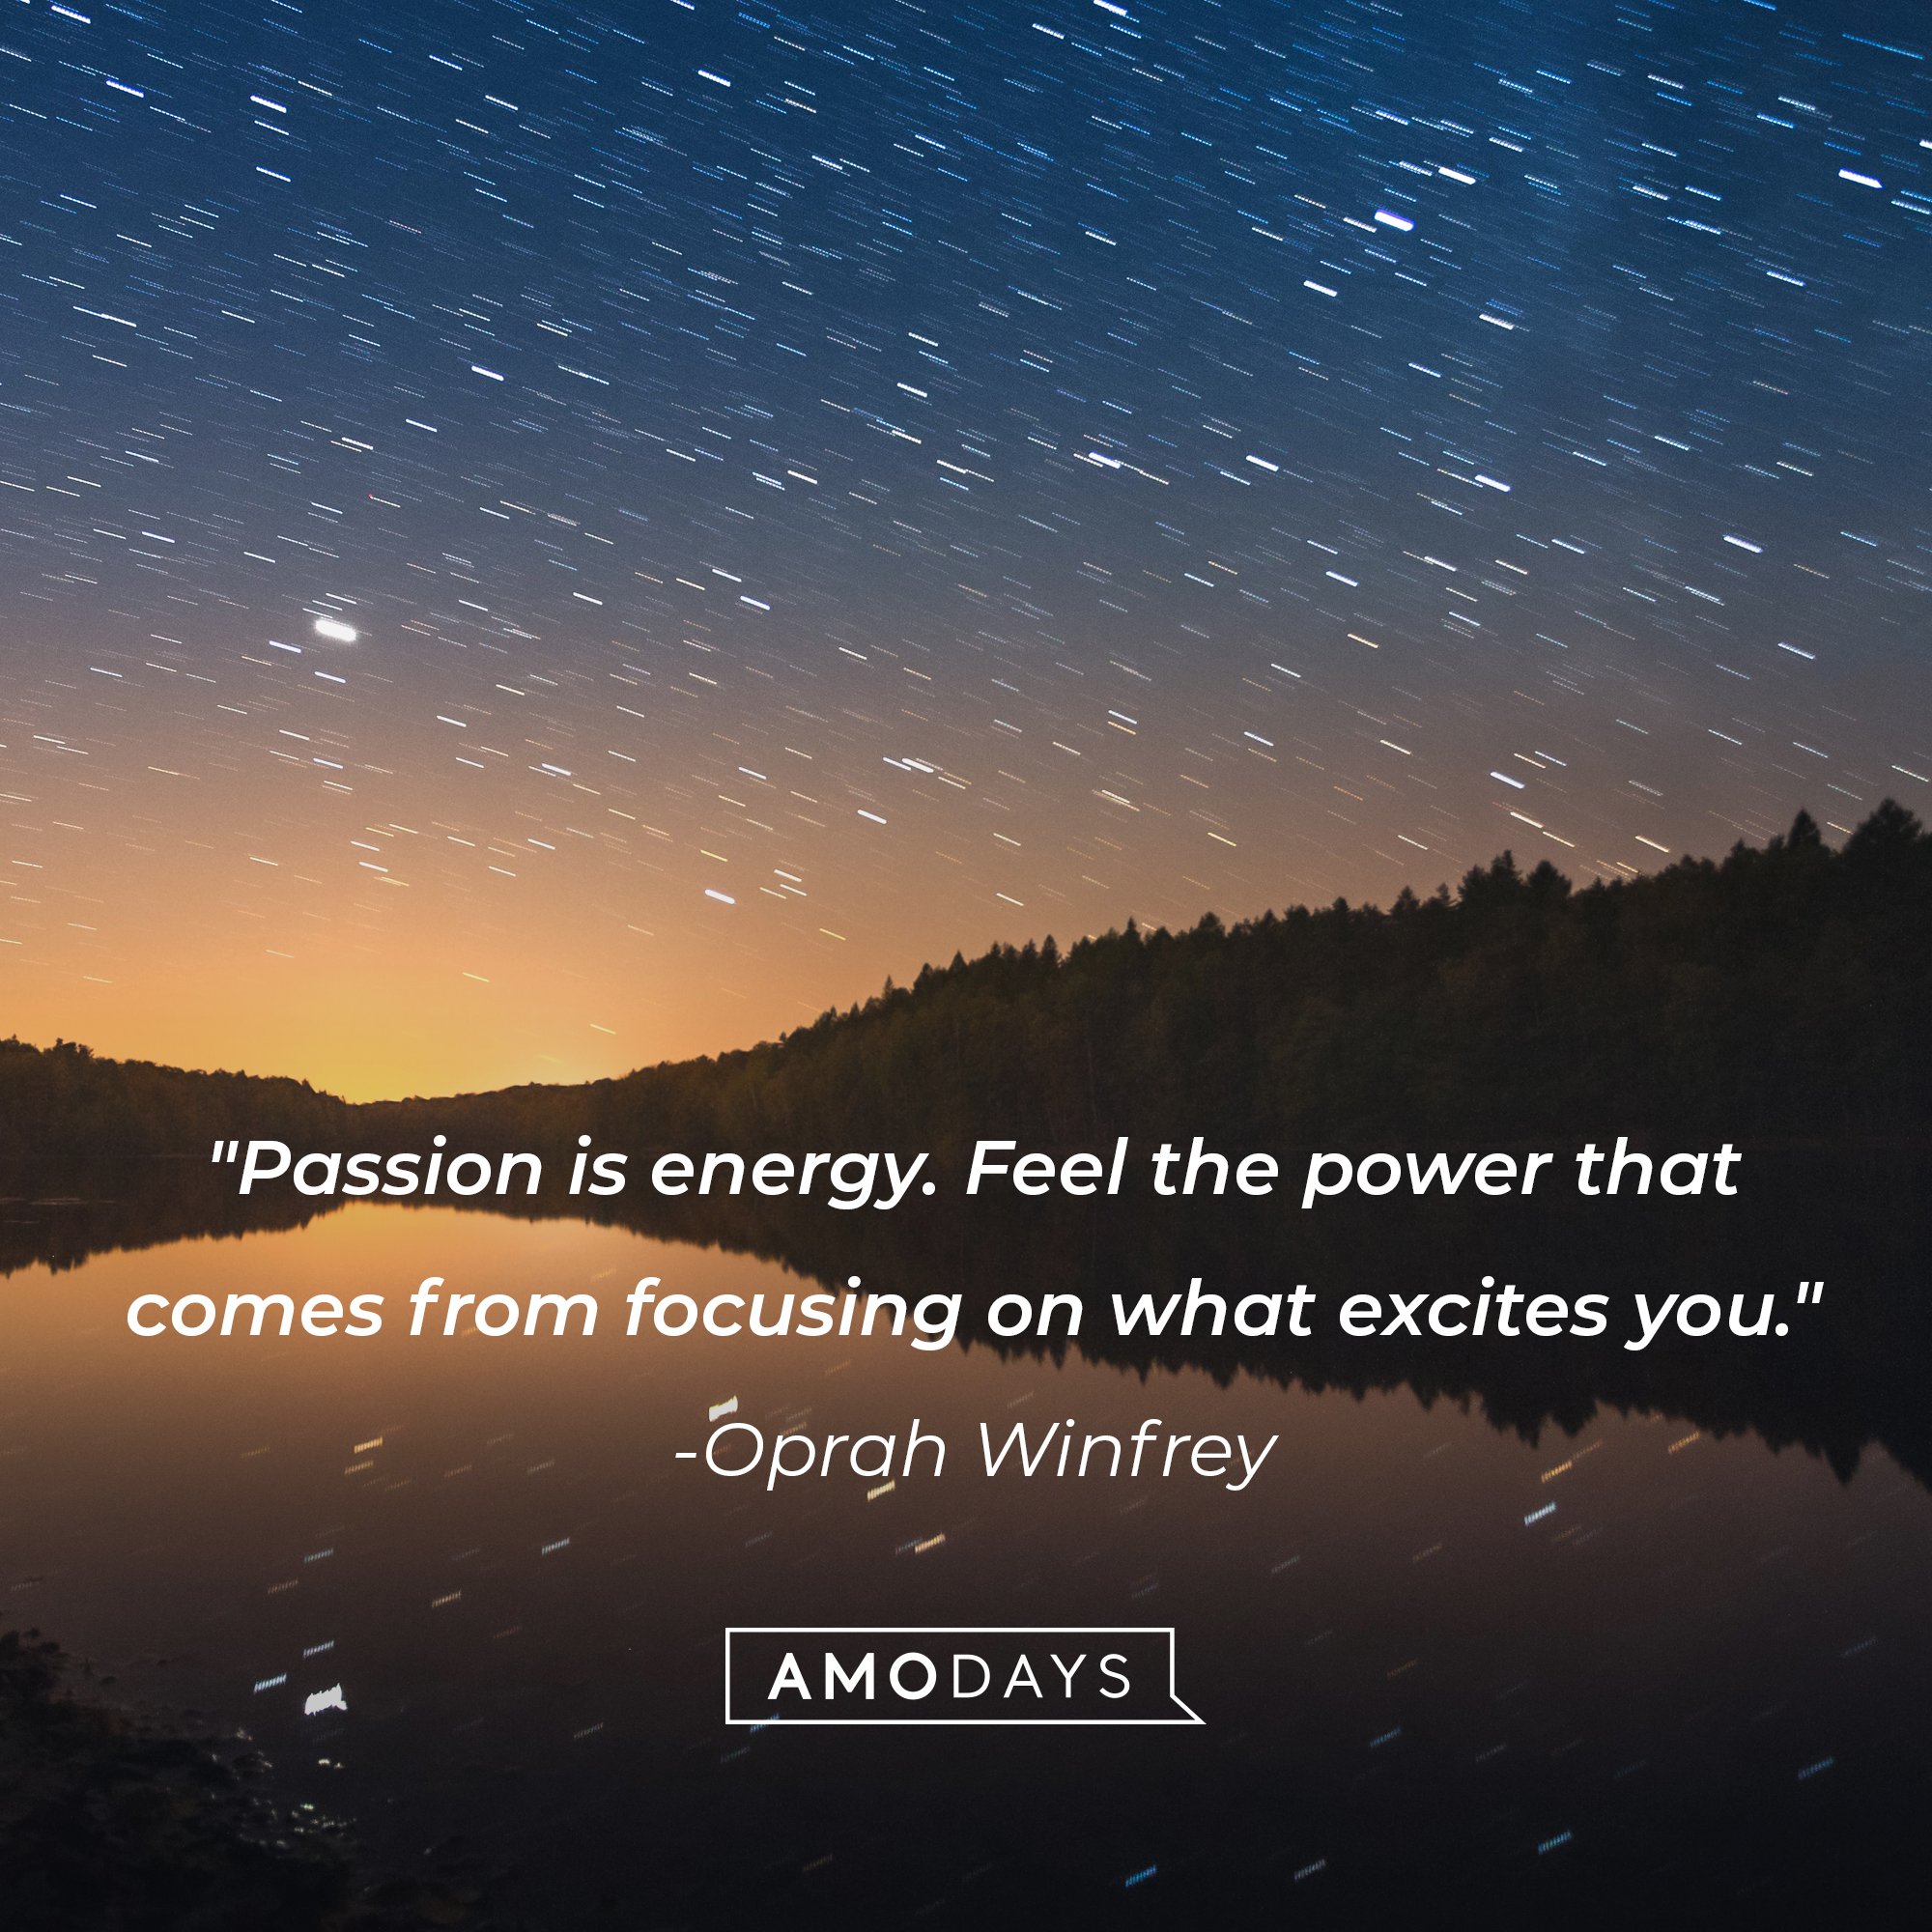 Oprah Winfrey’s quote: "Passion is energy. Feel the power that comes from focusing on what excites you."  | Image: AmoDays   